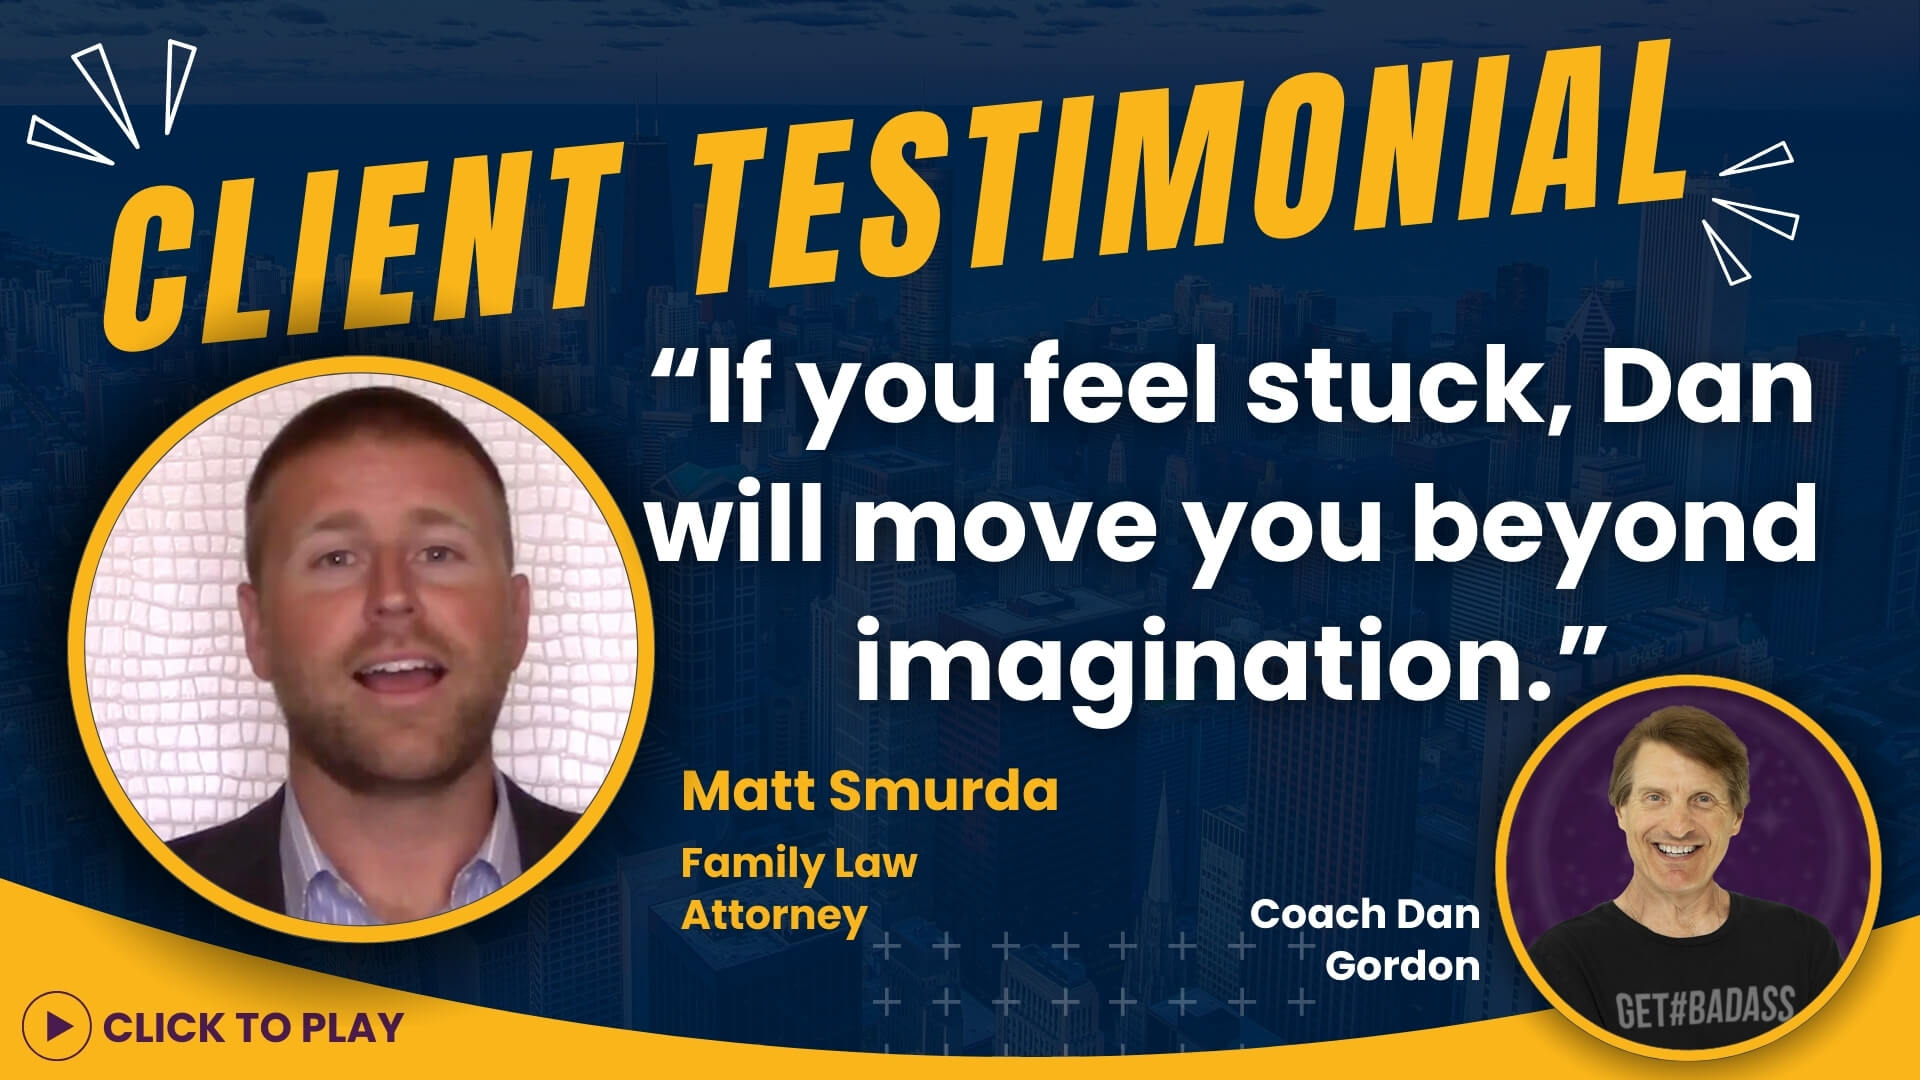 Matt Smurda, Family Law Attorney, endorses Coach Dan Gordon in a testimonial video, with their upbeat headshots and a quote on moving beyond imagination.